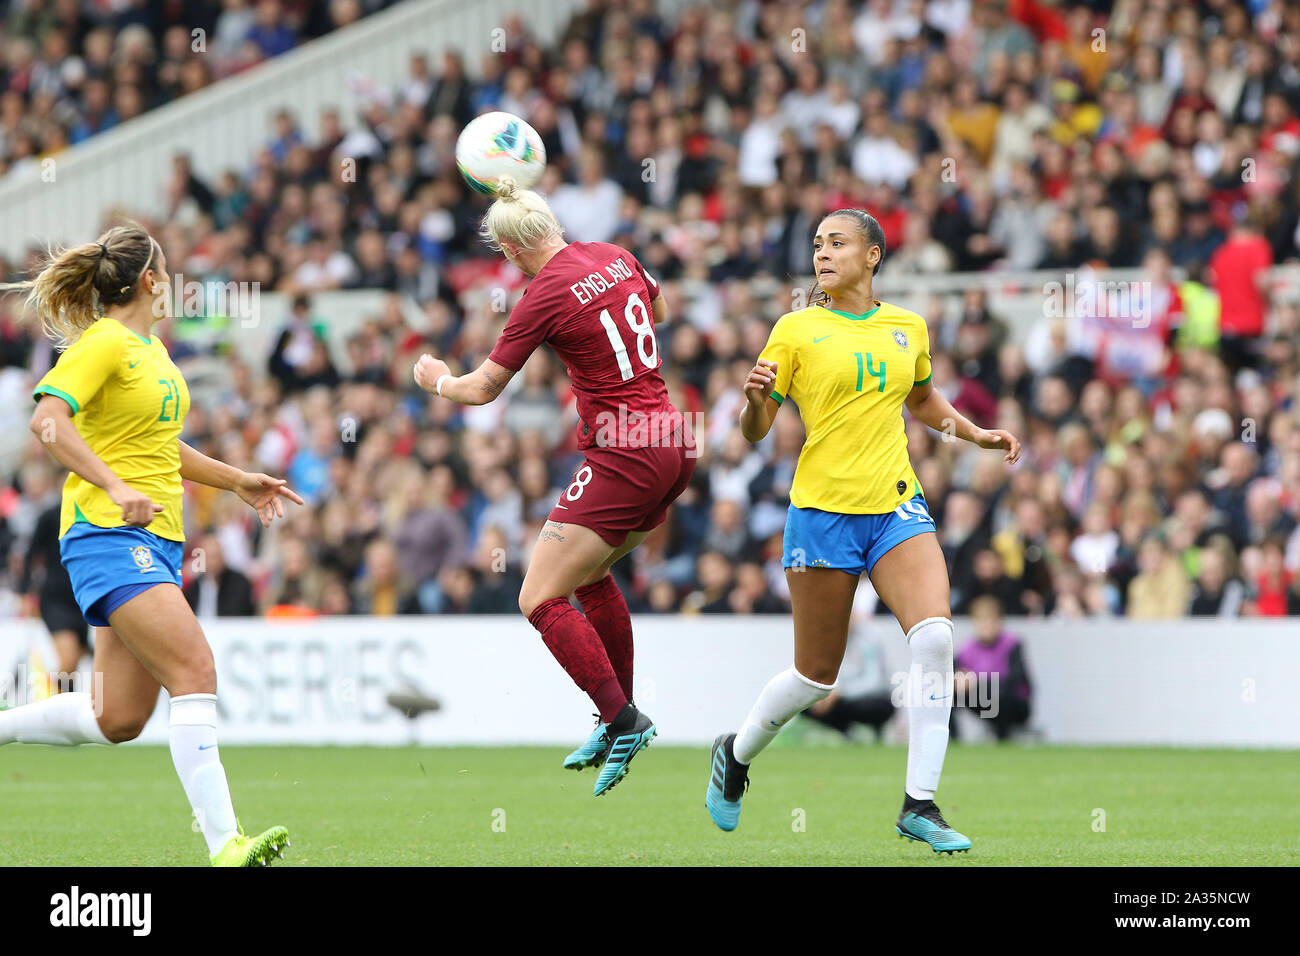 Middlesborough, UK. 05th Oct, 2019. Beth England of England heads the ball on as Kathellena of Brazil looks on during the International Friendly match between England Women and Brazil Women at the Riverside Stadium, Middlesbrough on Saturday 5th October 2019. (Credit: Harry Cook | MI News) Photograph may only be used for newspaper and/or magazine editorial purposes, license required for commercial use Credit: MI News & Sport /Alamy Live News Stock Photo